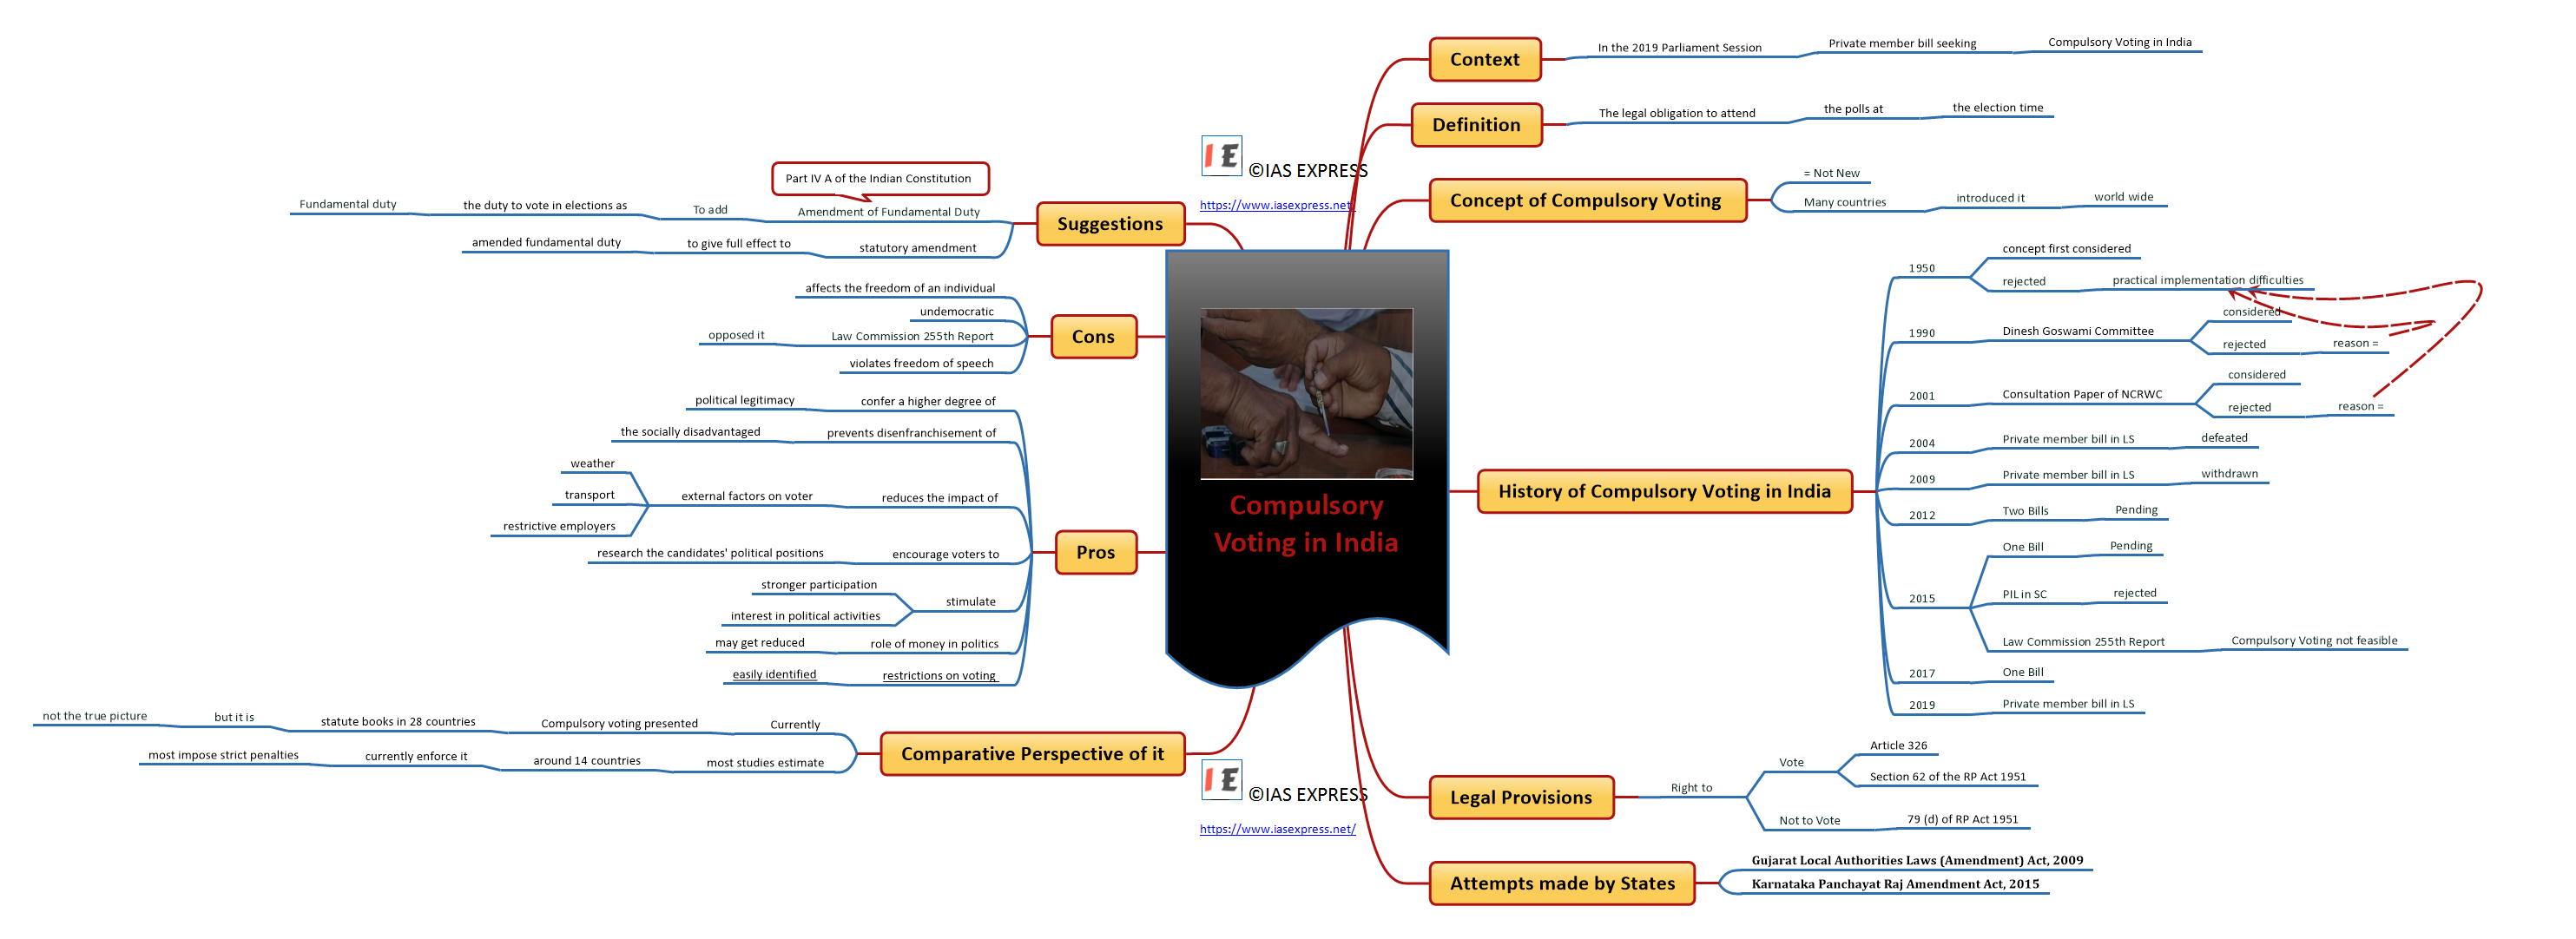 Mind map of Compulsory Voting in India